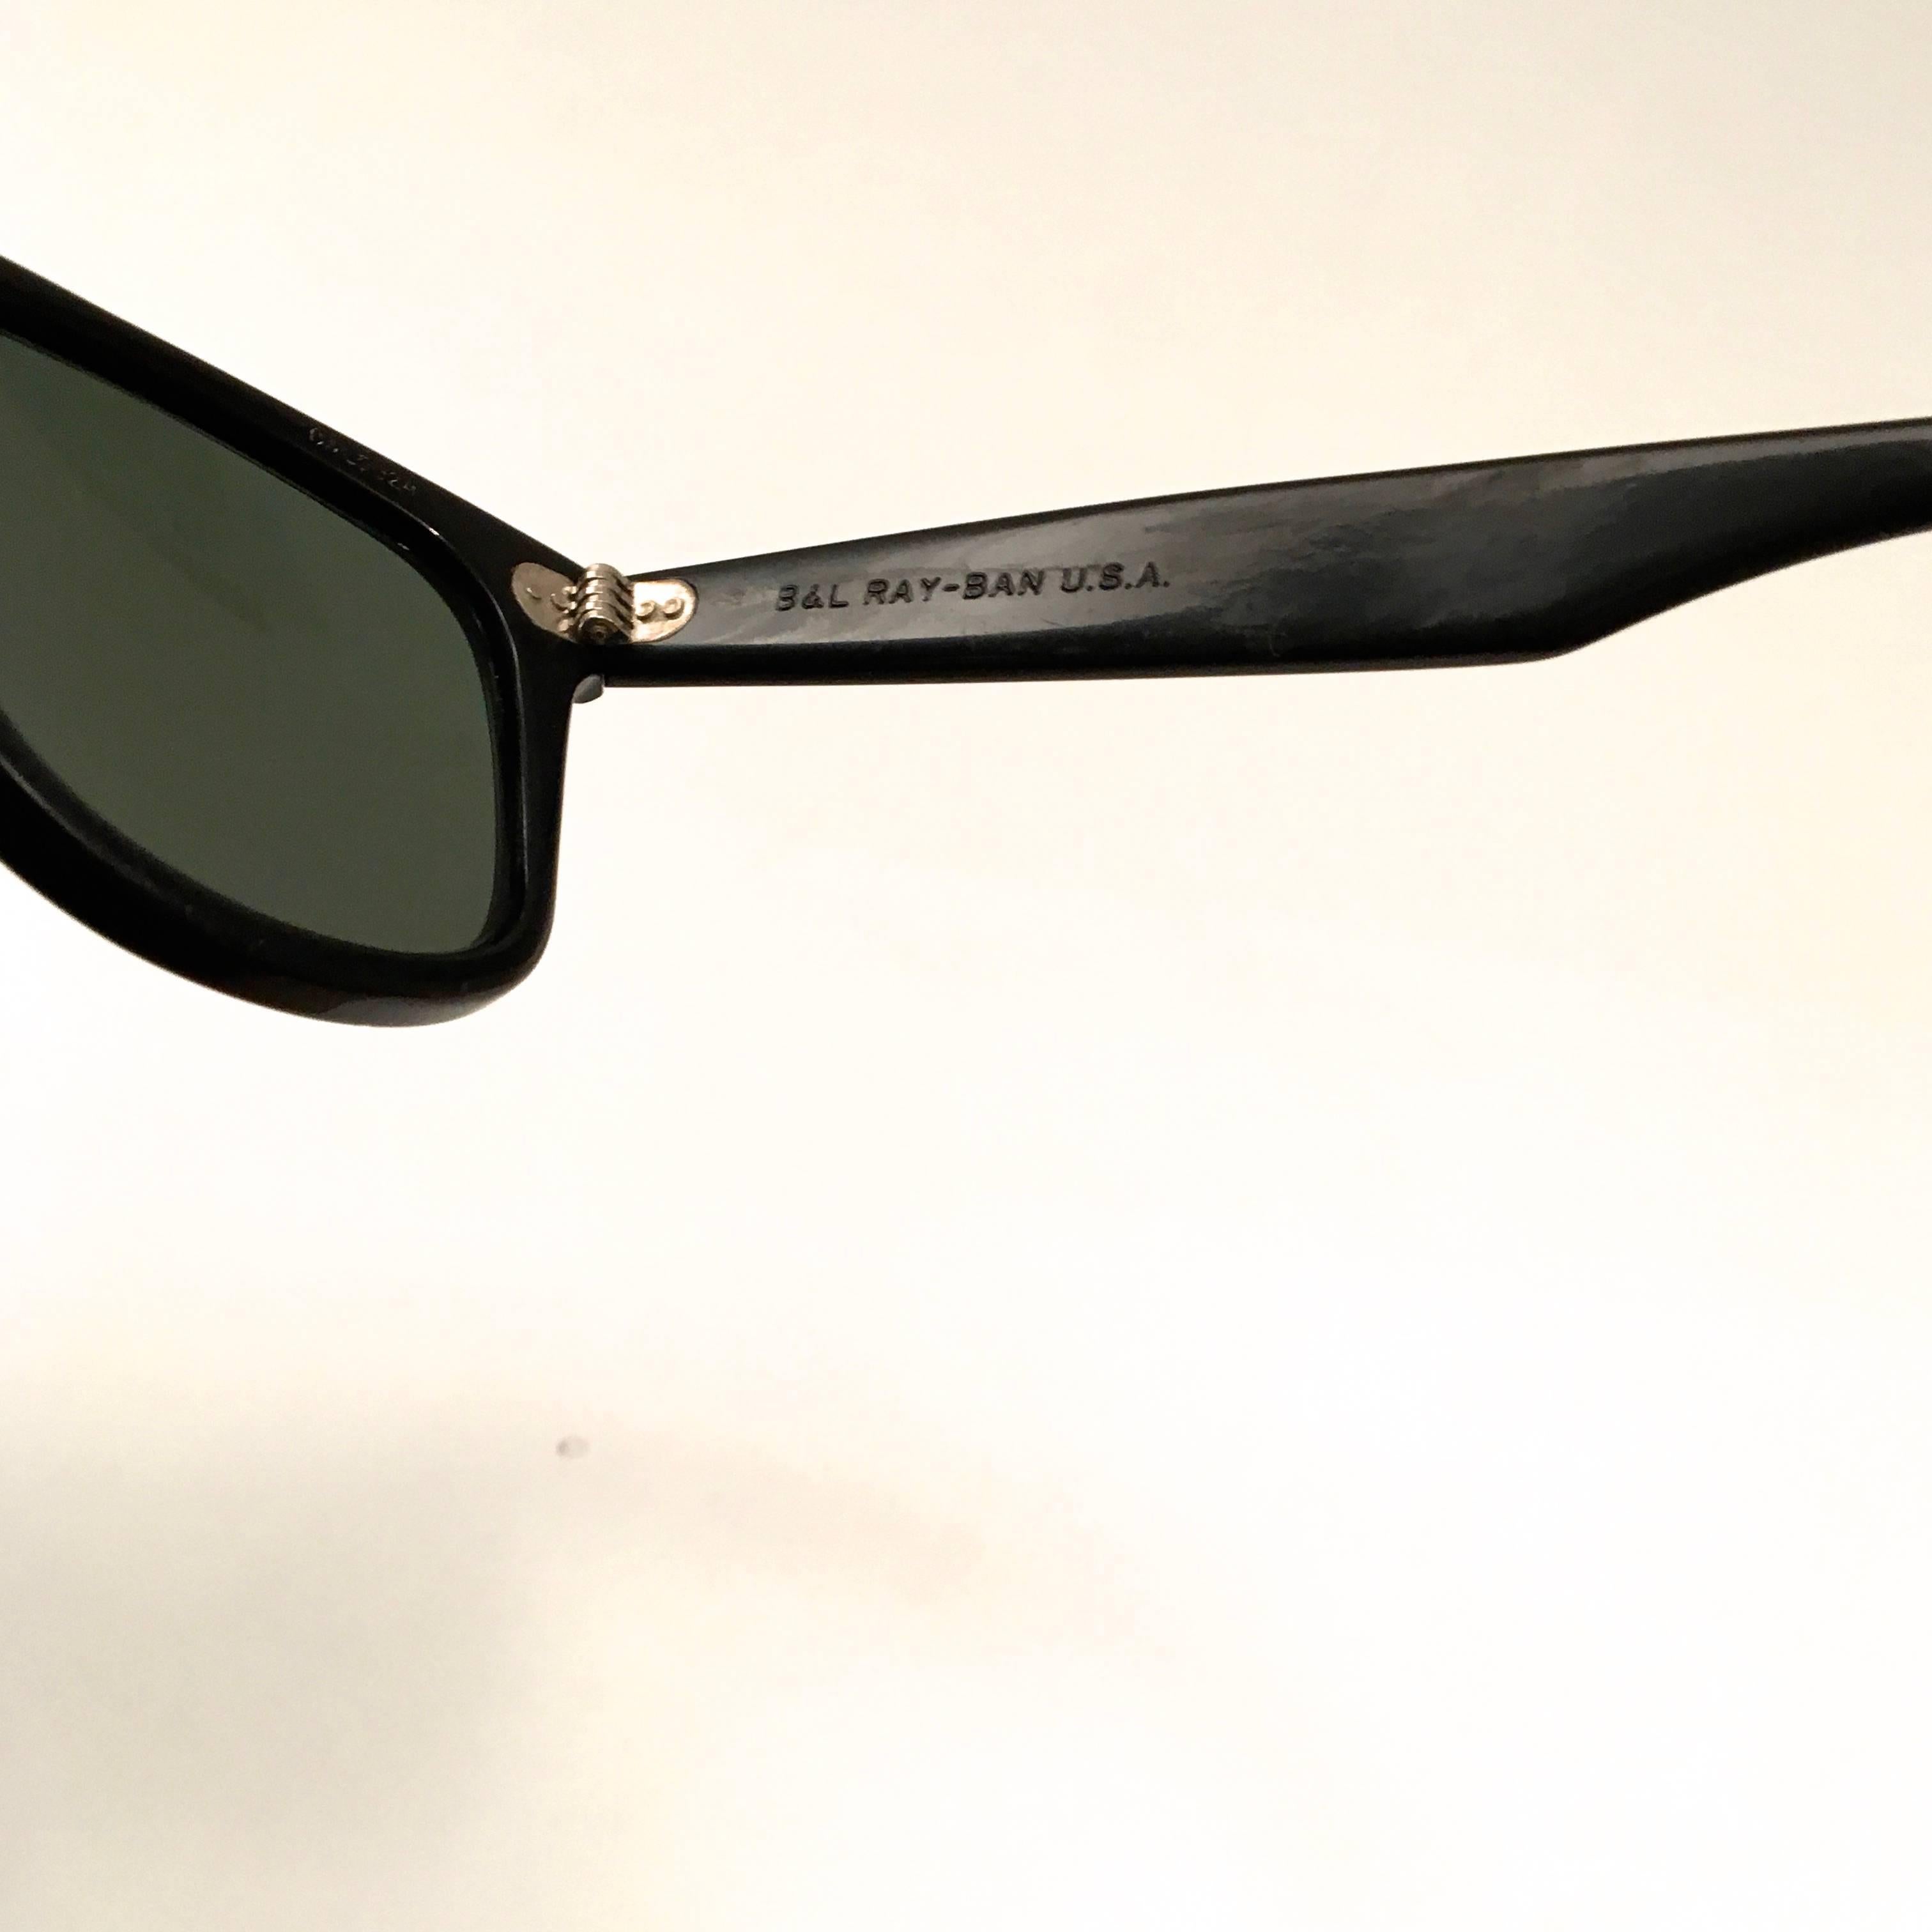 Ray Ban Wayfarer Sunglasses Early 1960s Extremely Rare For Sale 1